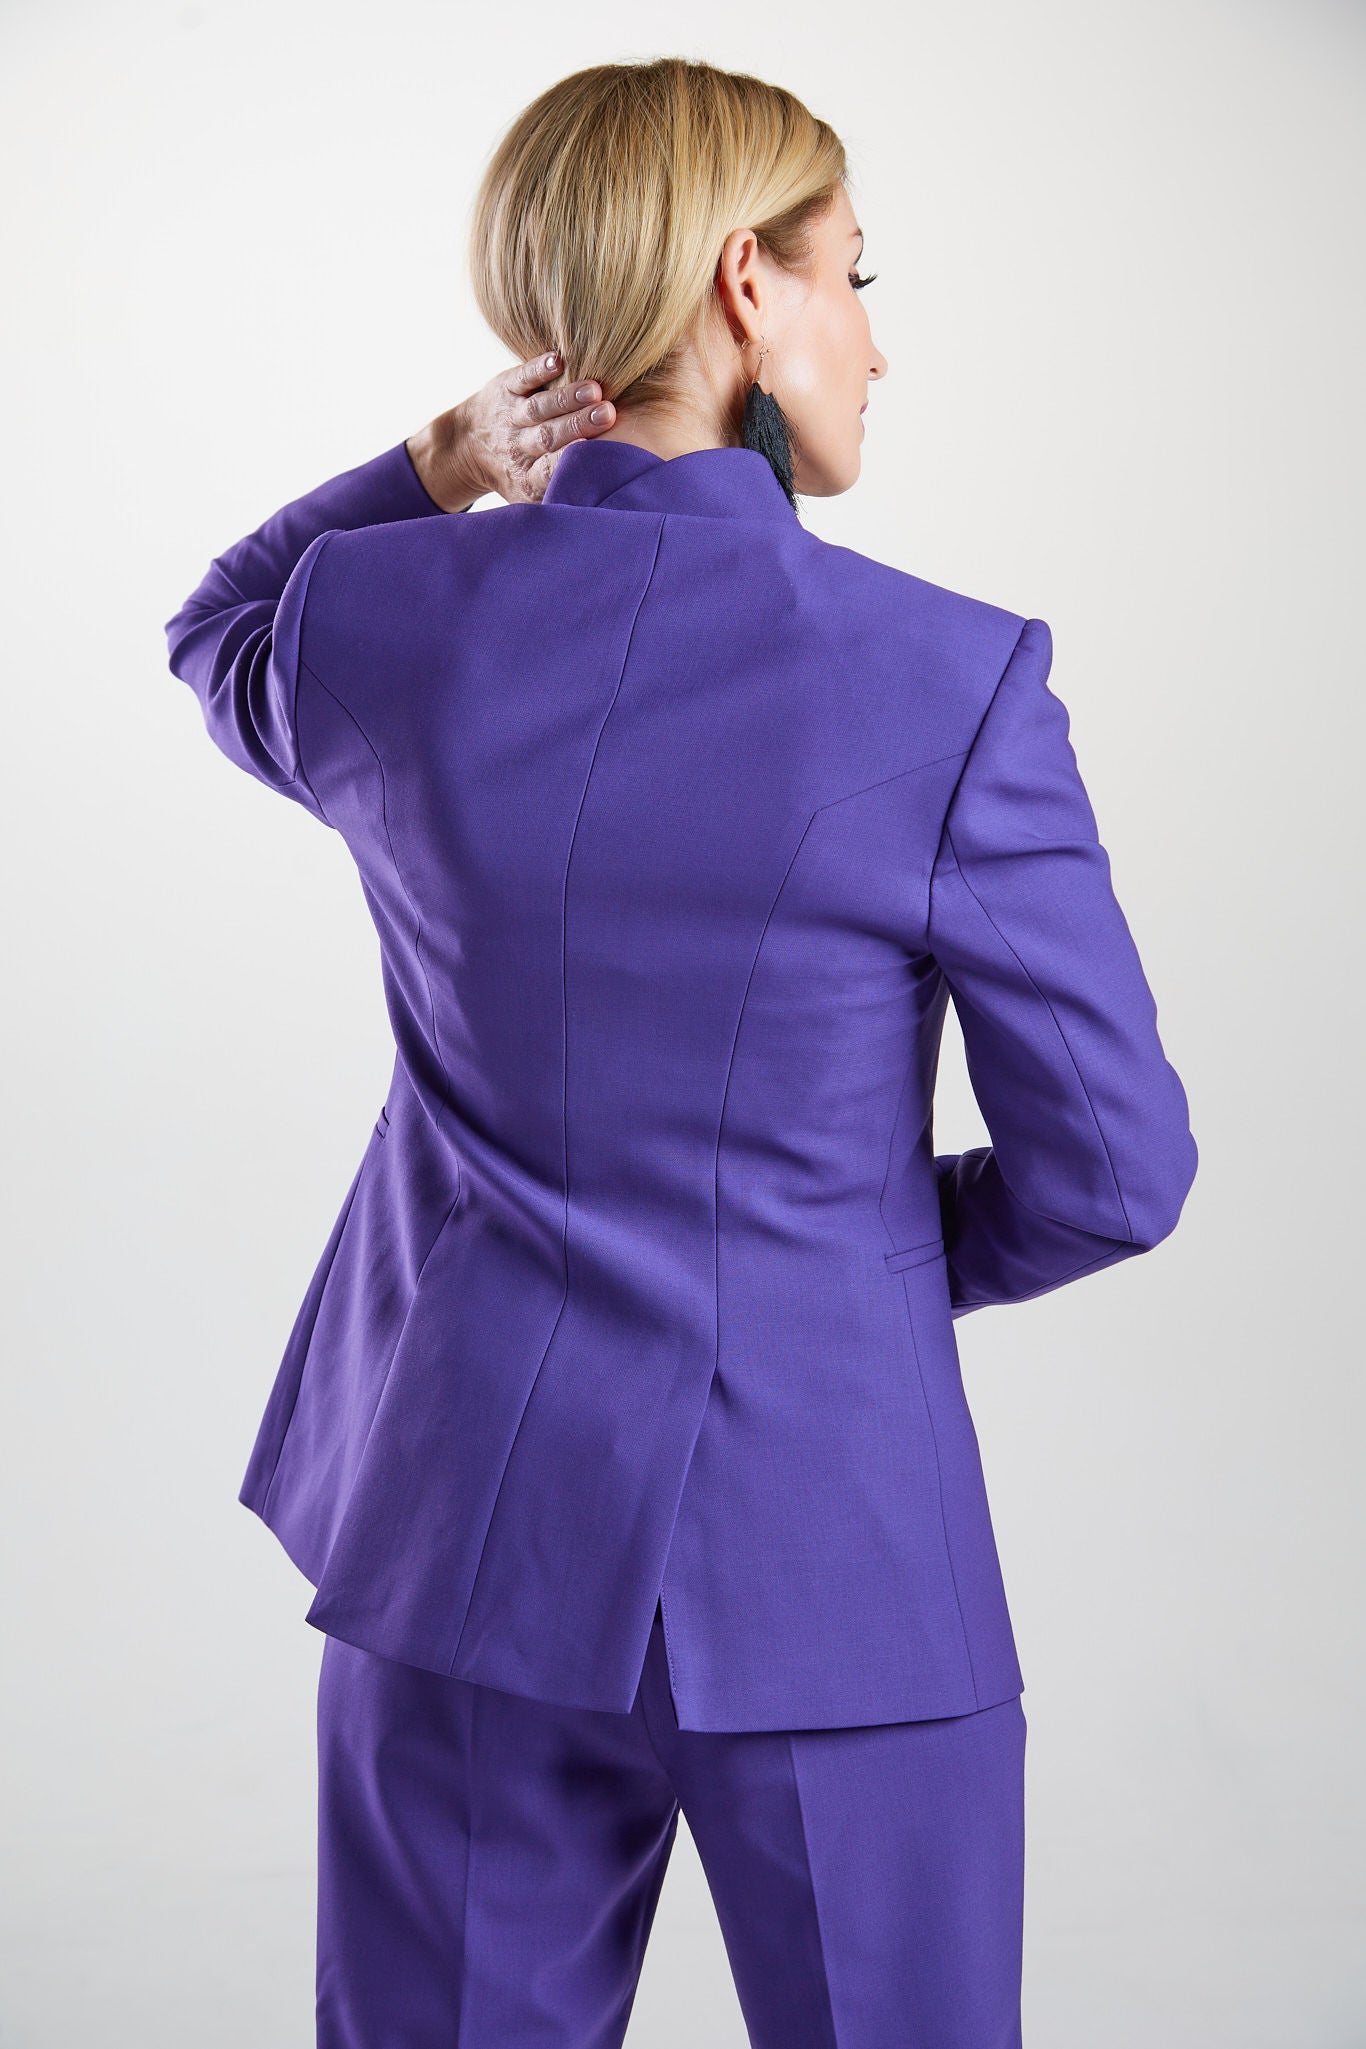 Seragyi's Nicole Blazer in Women's Suits, made from Italian Merino Wool. Features a cross-over collar and pyramid-cut sleeves, blending elegance and comfort in Women's Clothing.